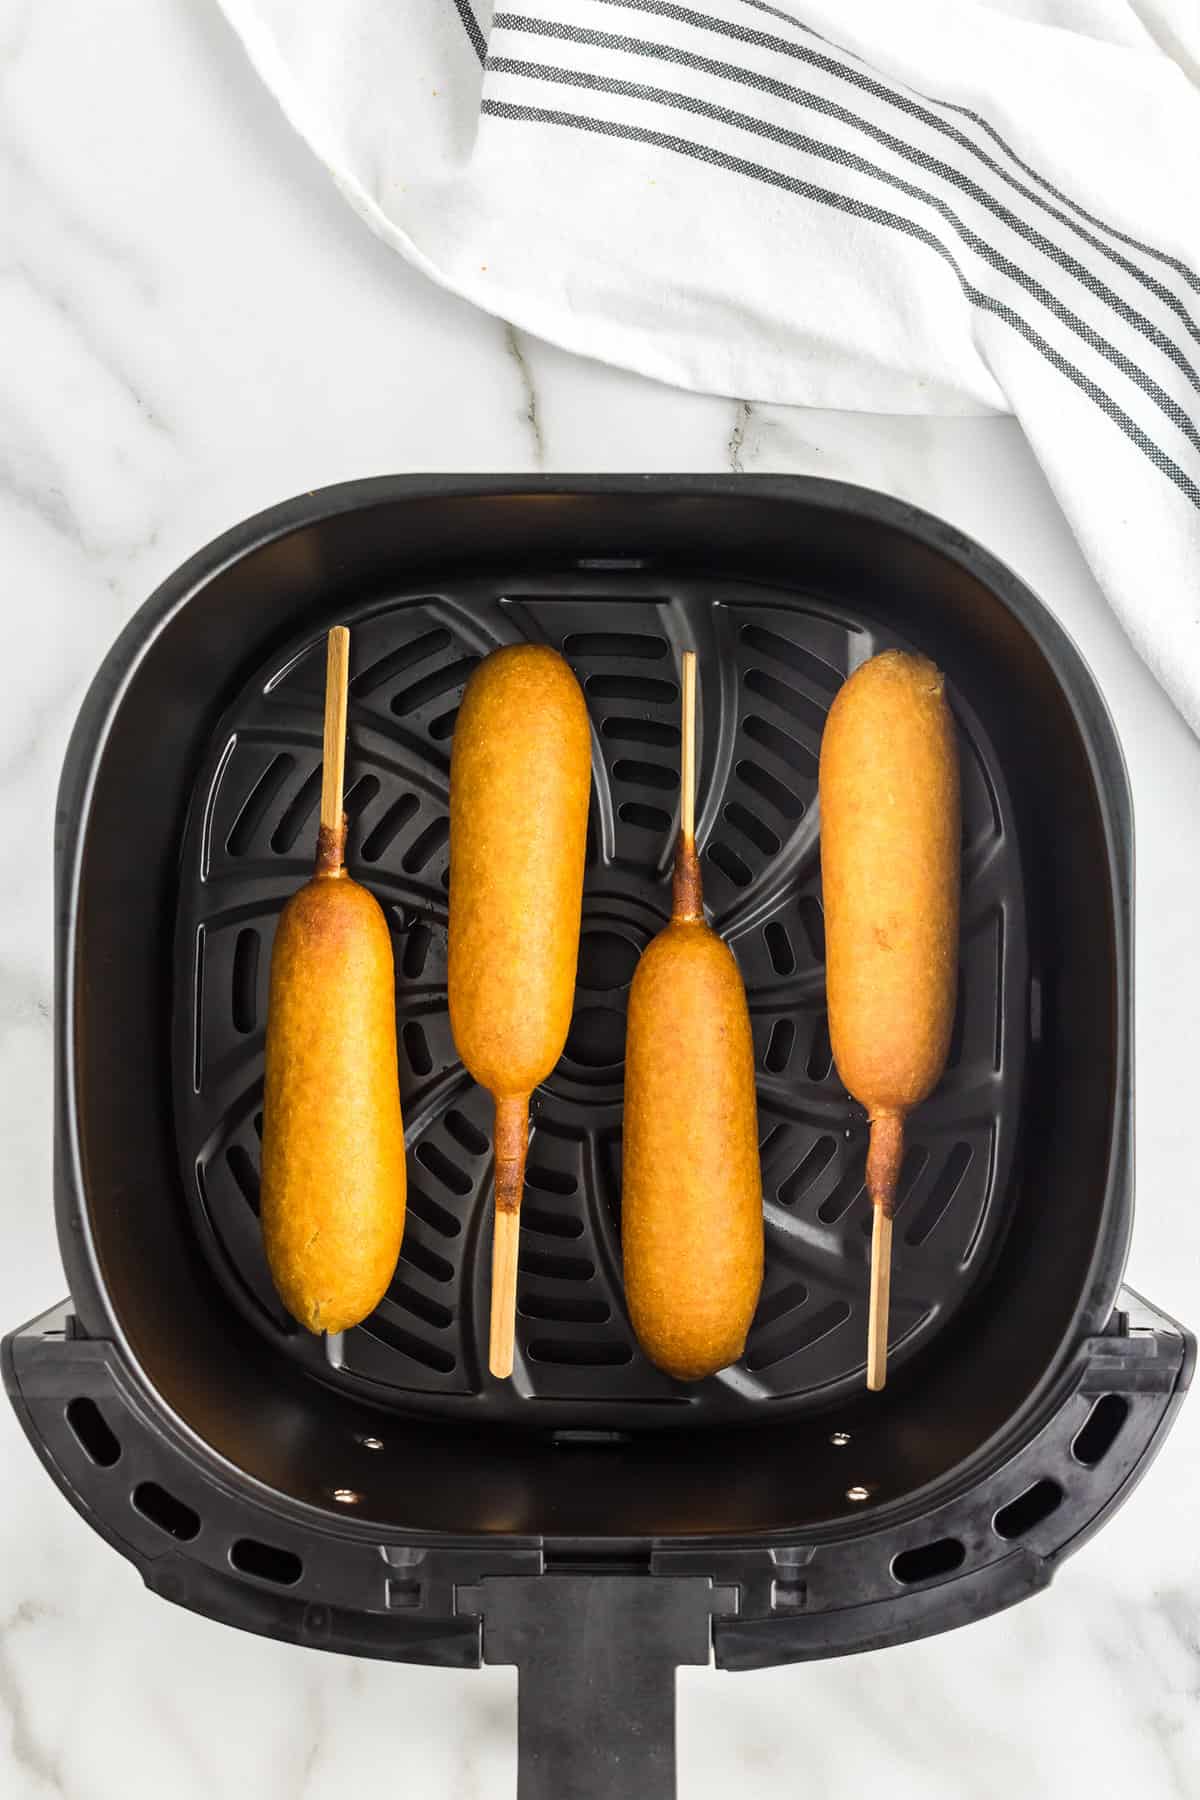 Four cooked corn dogs in air fryer basket